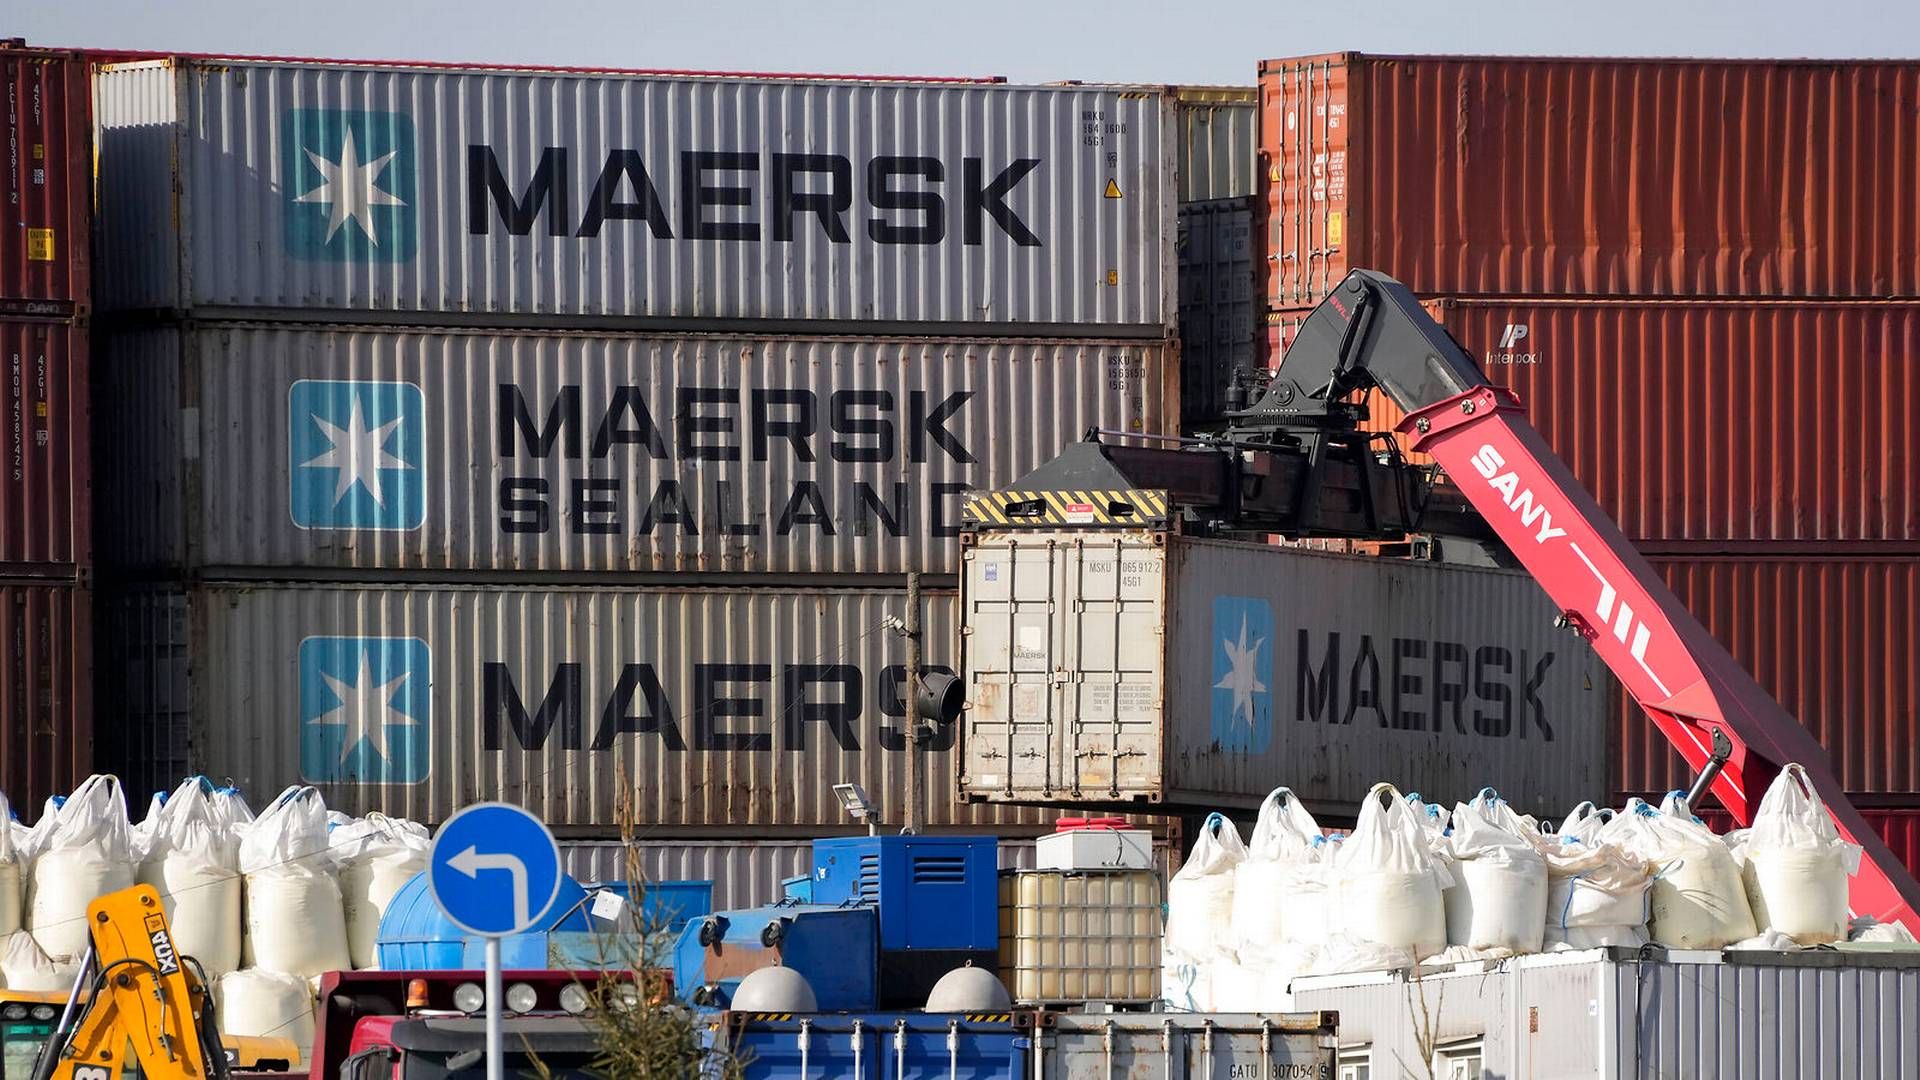 Maersk has given up bringing 20,000 containers out of Russia. Here, in the container terminal in St. Petersburg. | Photo: Uncredited/AP/Ritzau Scanpix